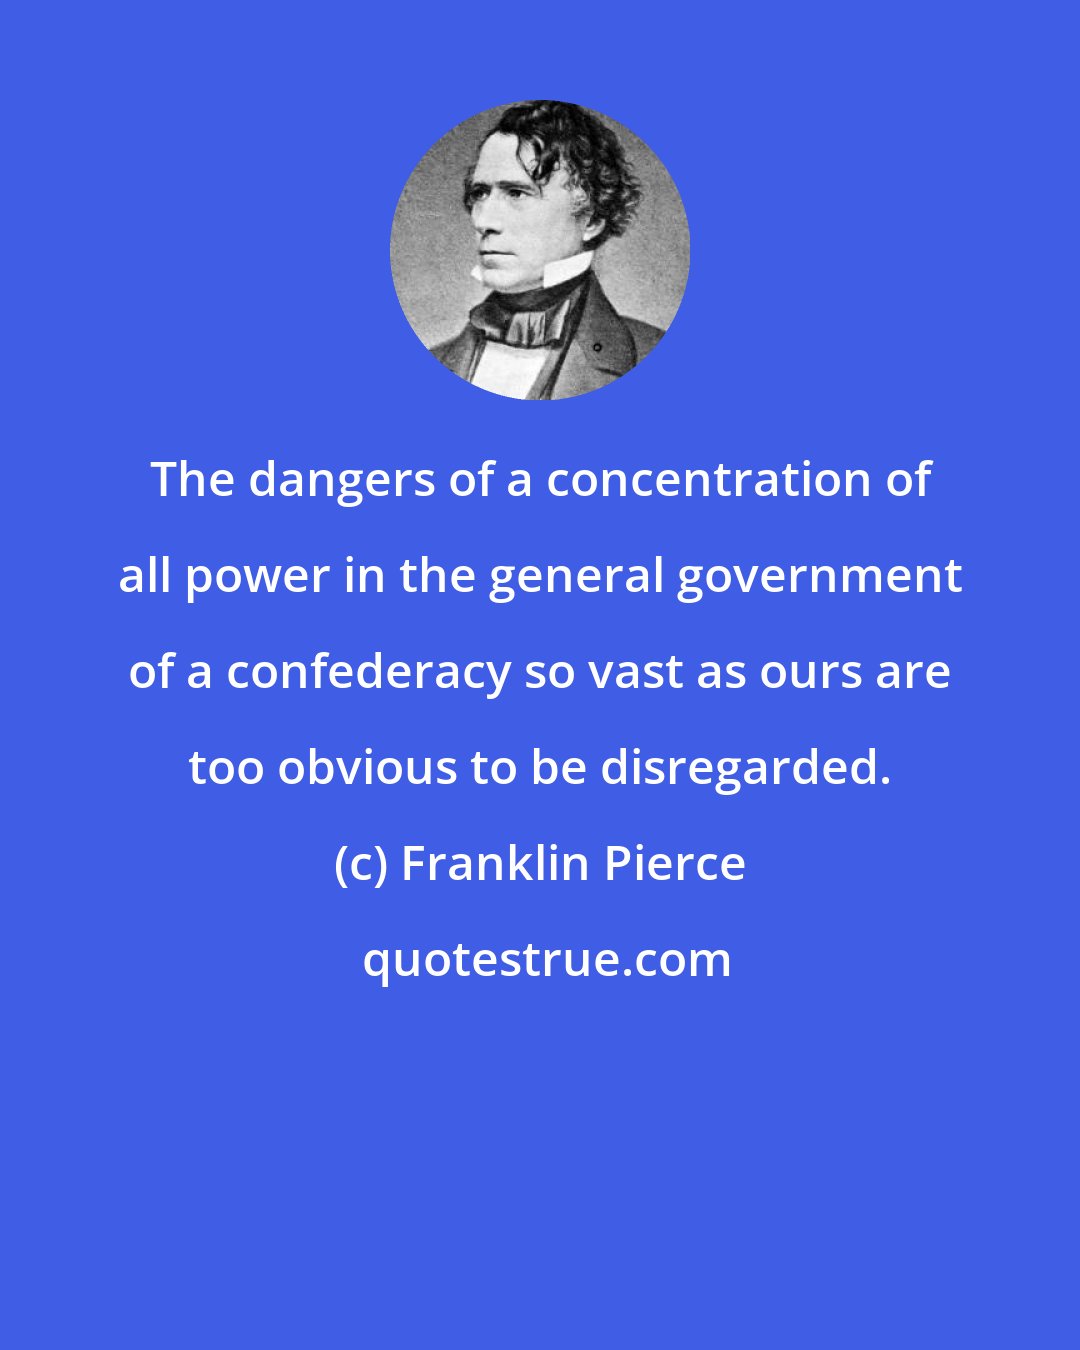 Franklin Pierce: The dangers of a concentration of all power in the general government of a confederacy so vast as ours are too obvious to be disregarded.